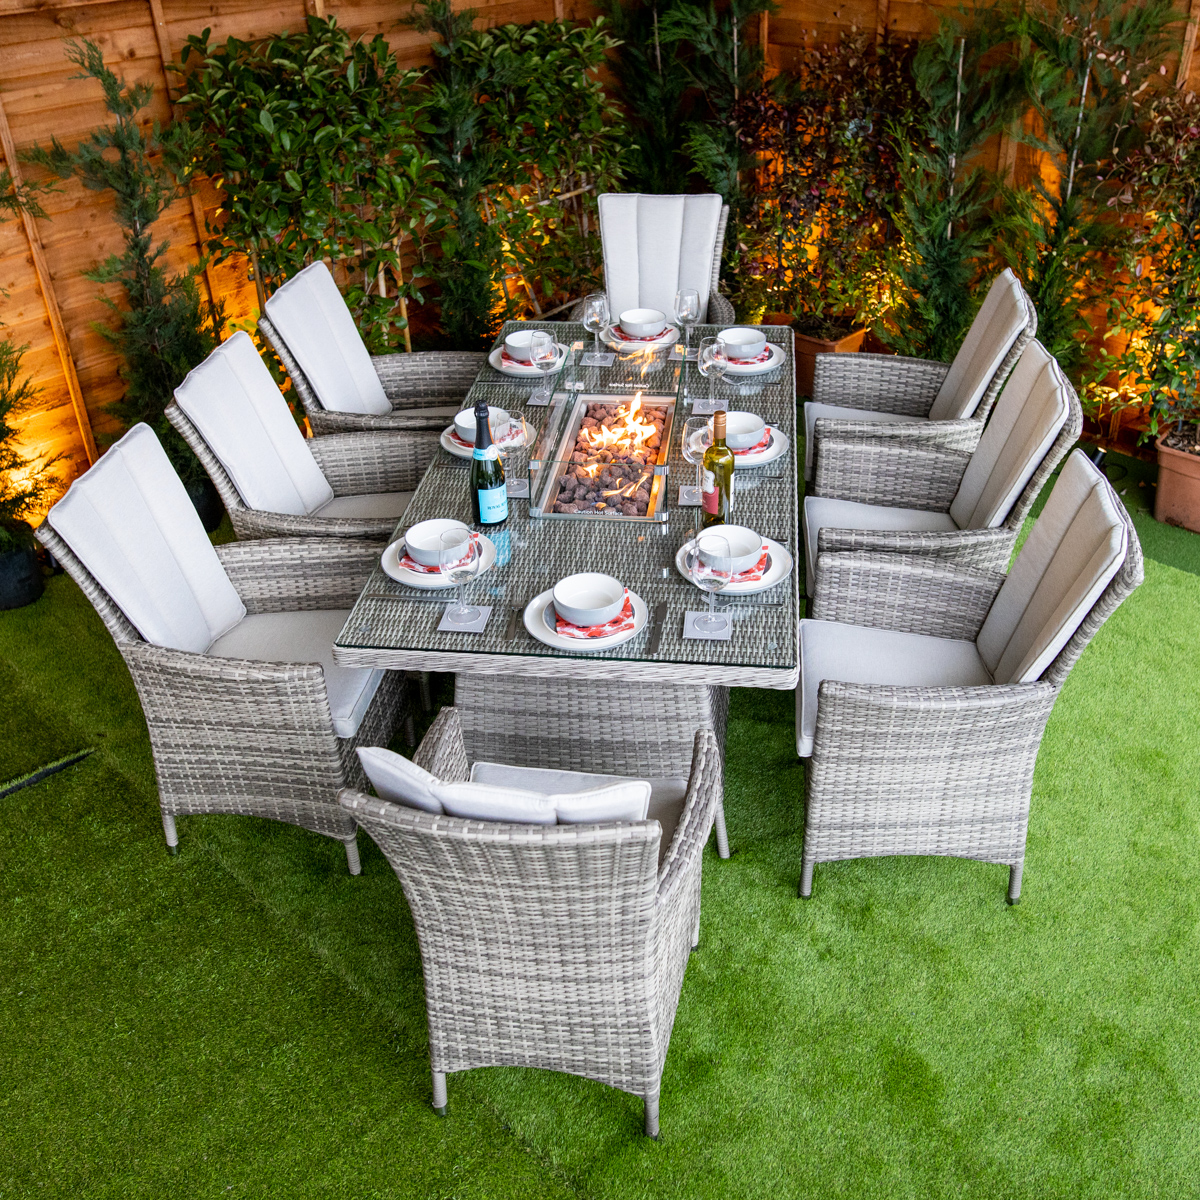 Outdoor Entertaining: Hosting a Stylish Garden Party with Rattan